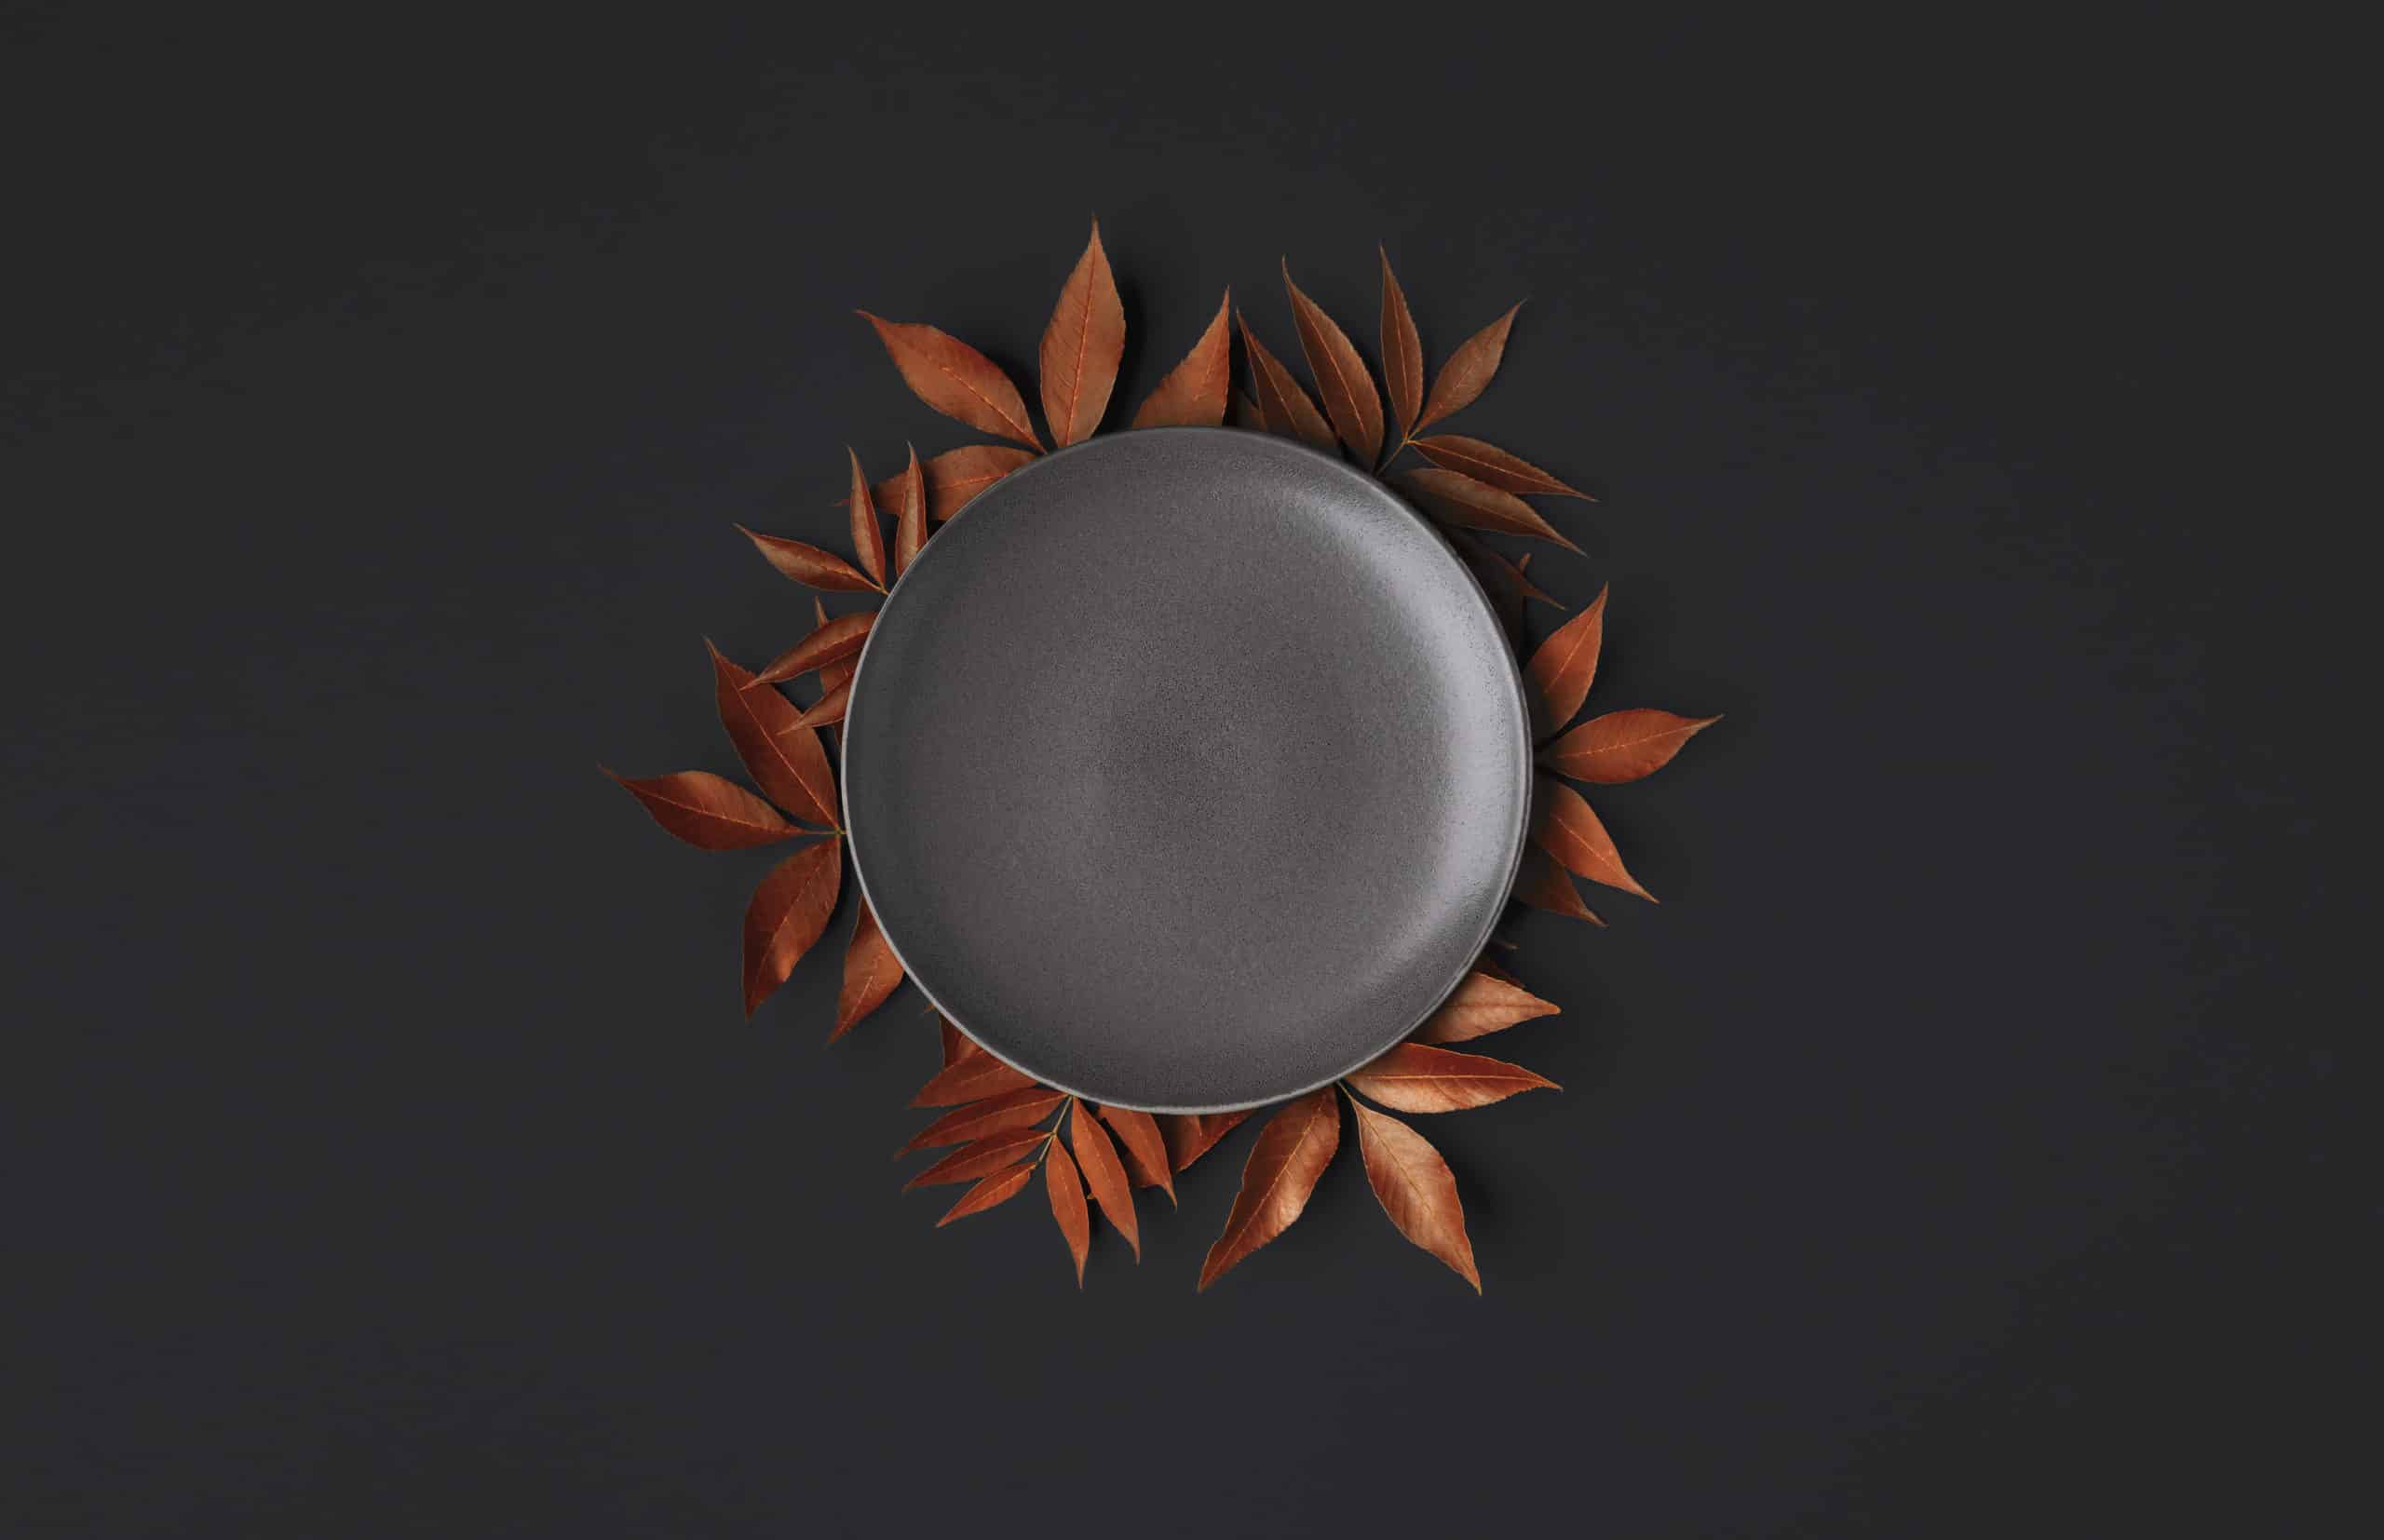 Thanksgiving table with an empty grey plate and orange leaves decoration on a black background. Autumn food background. Above view of an empty dish.